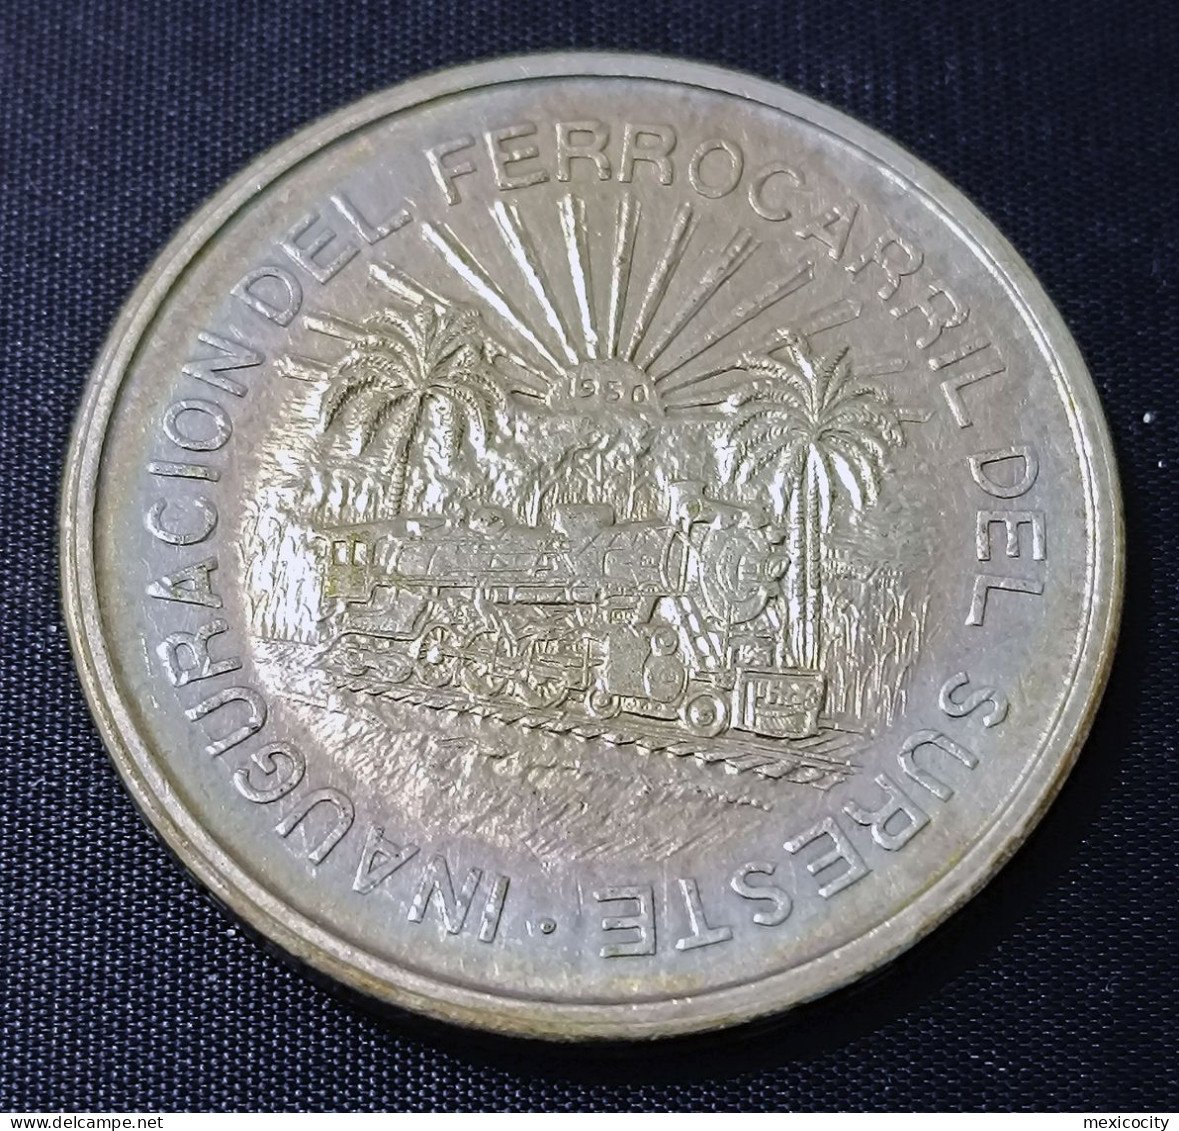 MEXICO 1950 $5 SOUTHEASTERN RAILROAD Silver Coin, See Imgs., Nice, Rather Scarce - Mexique